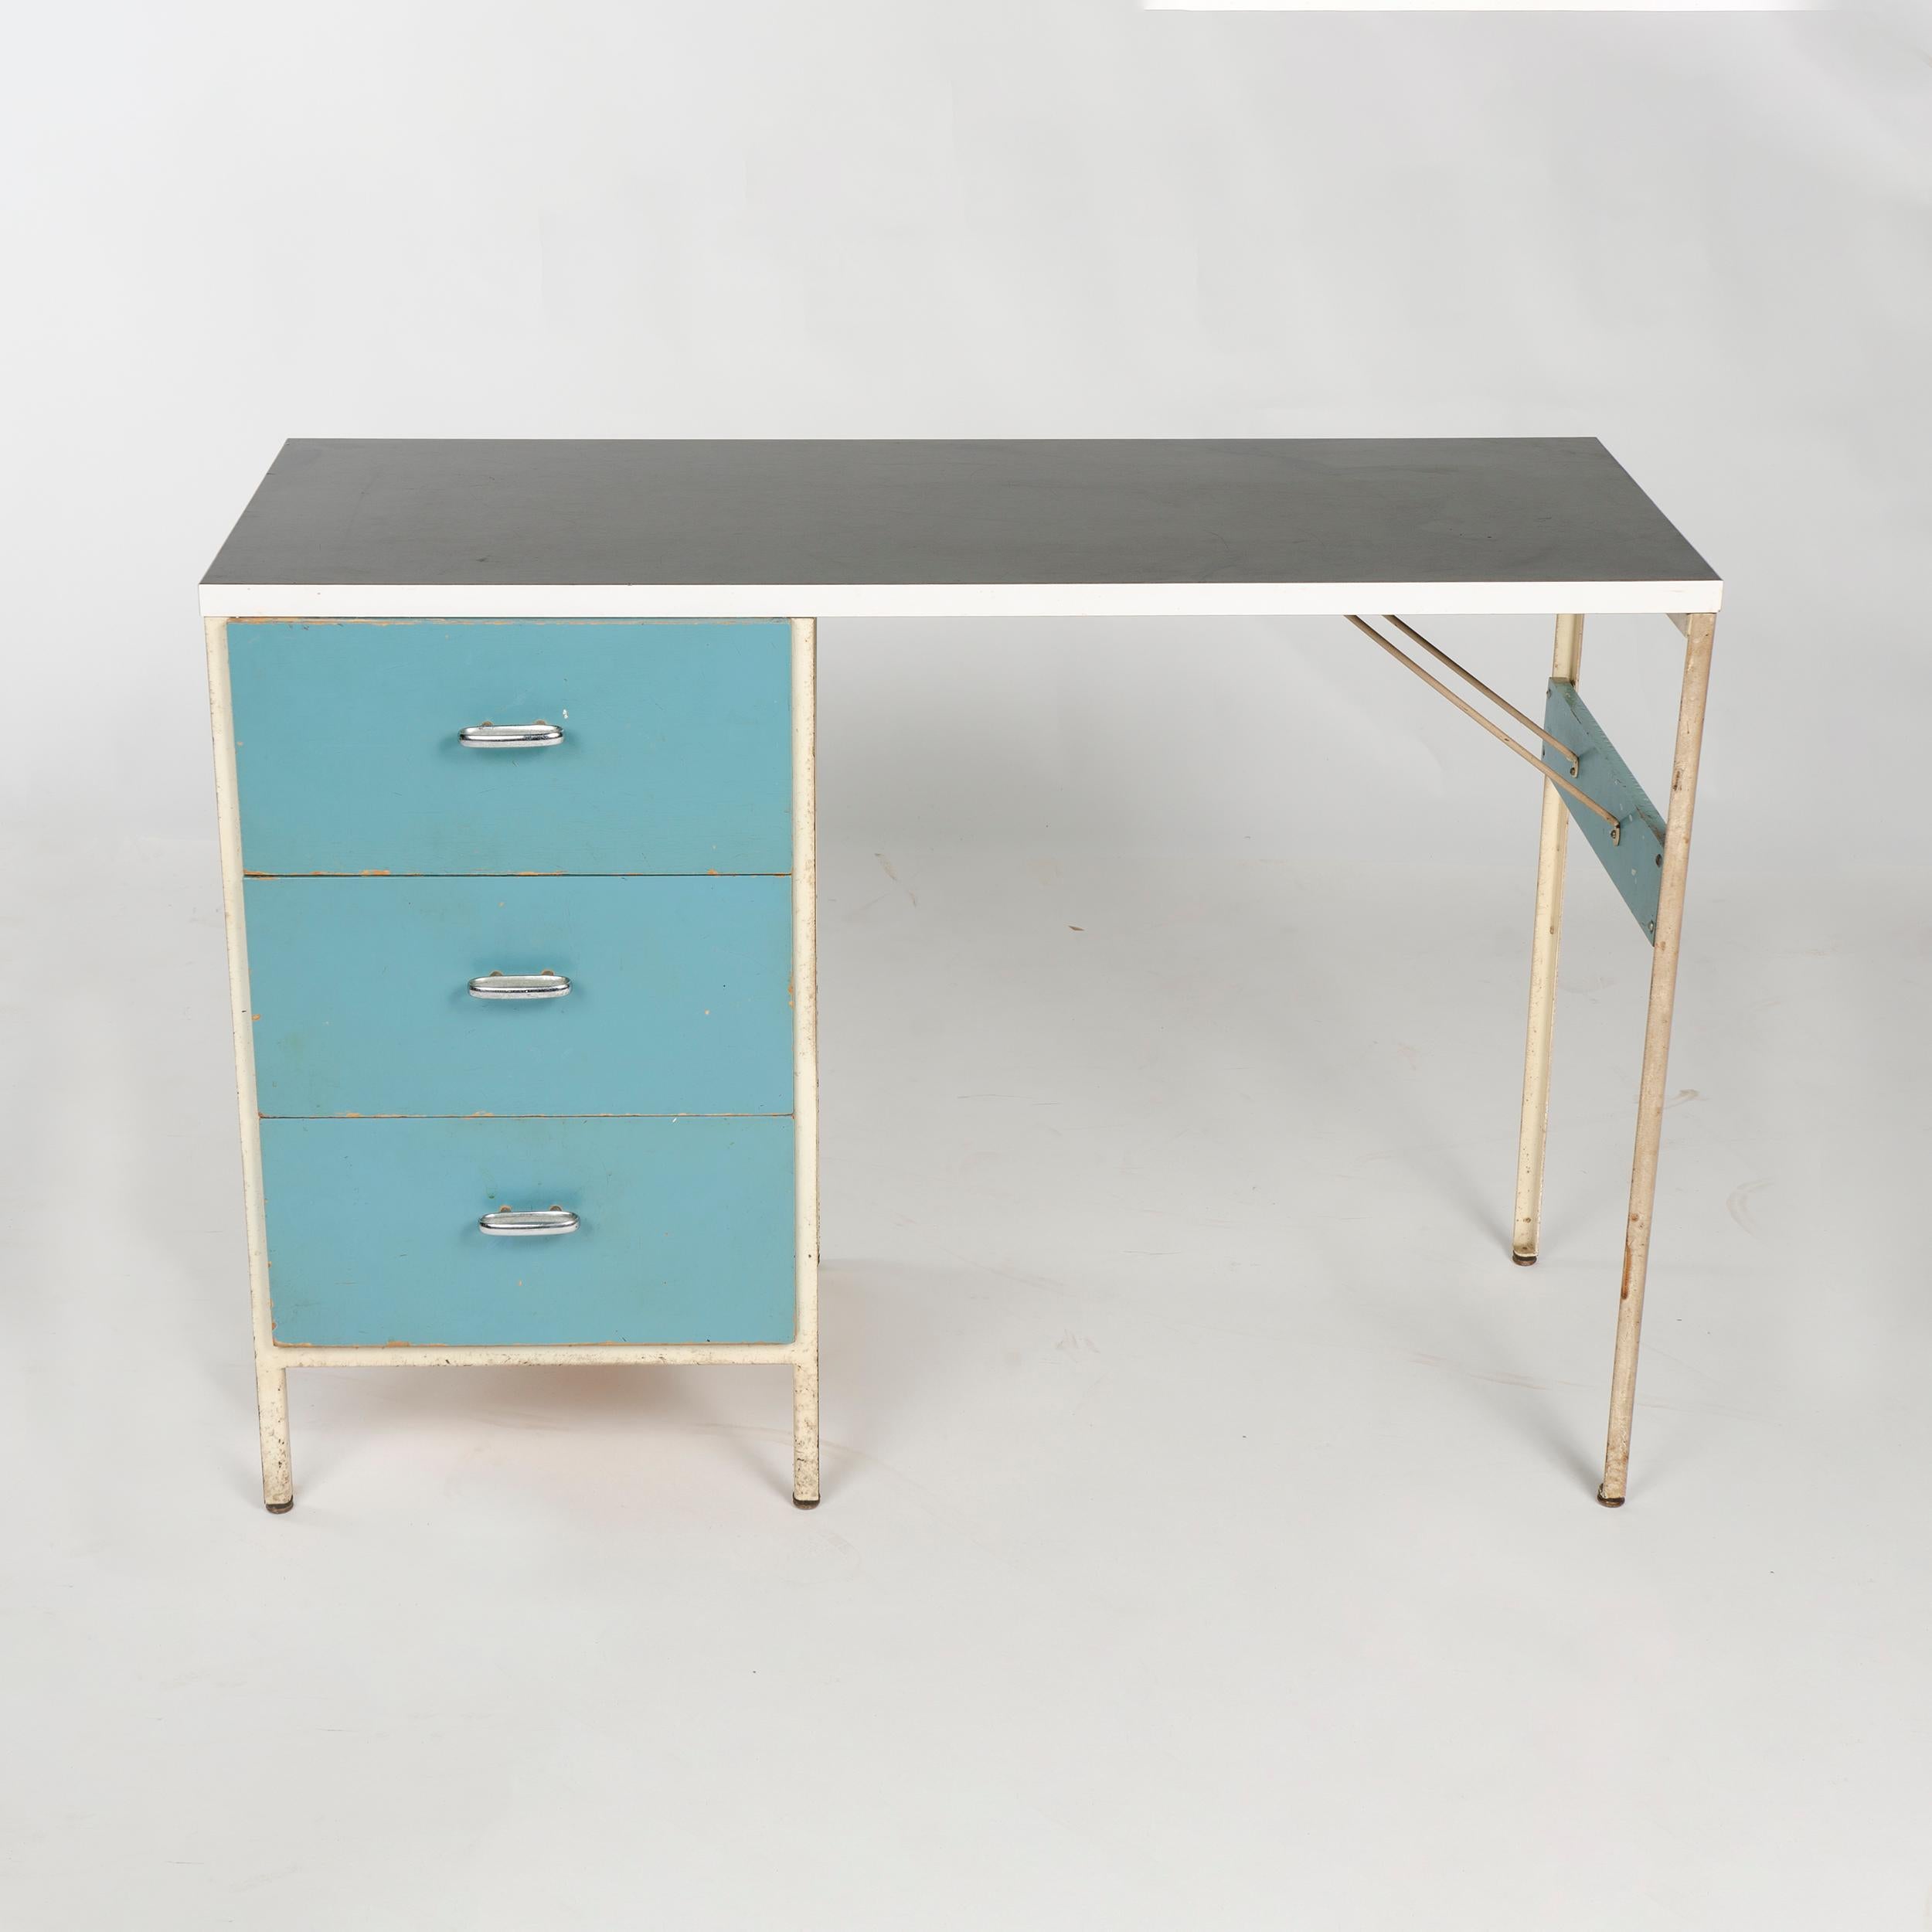 A compact white steel frame desk with three blue enameled drawers and black laminate top. 
Model 4111 from the 'Steel Frame' line for Herman Miller.